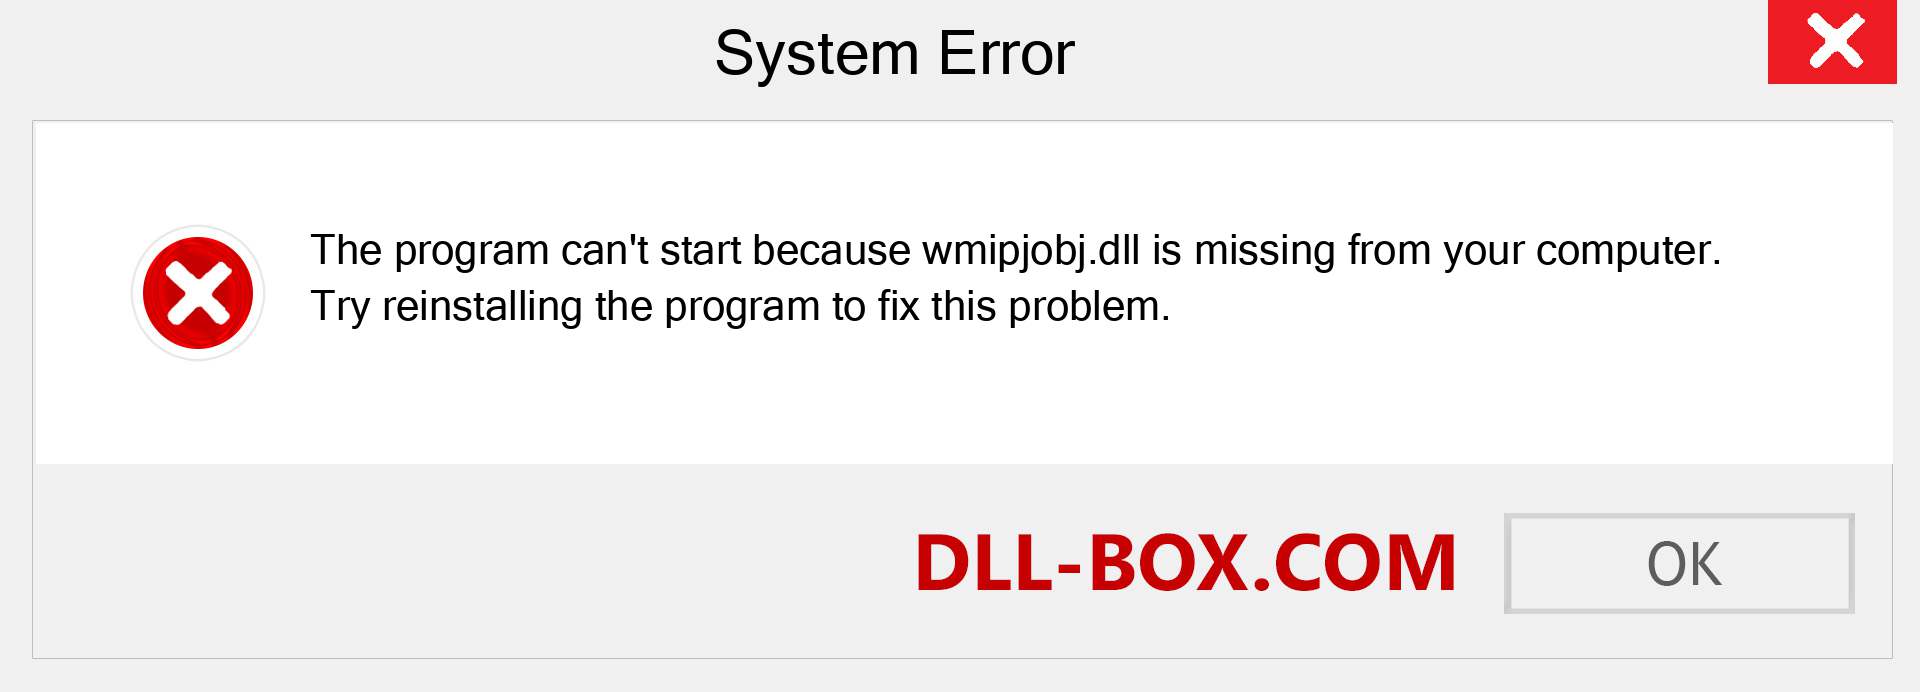  wmipjobj.dll file is missing?. Download for Windows 7, 8, 10 - Fix  wmipjobj dll Missing Error on Windows, photos, images